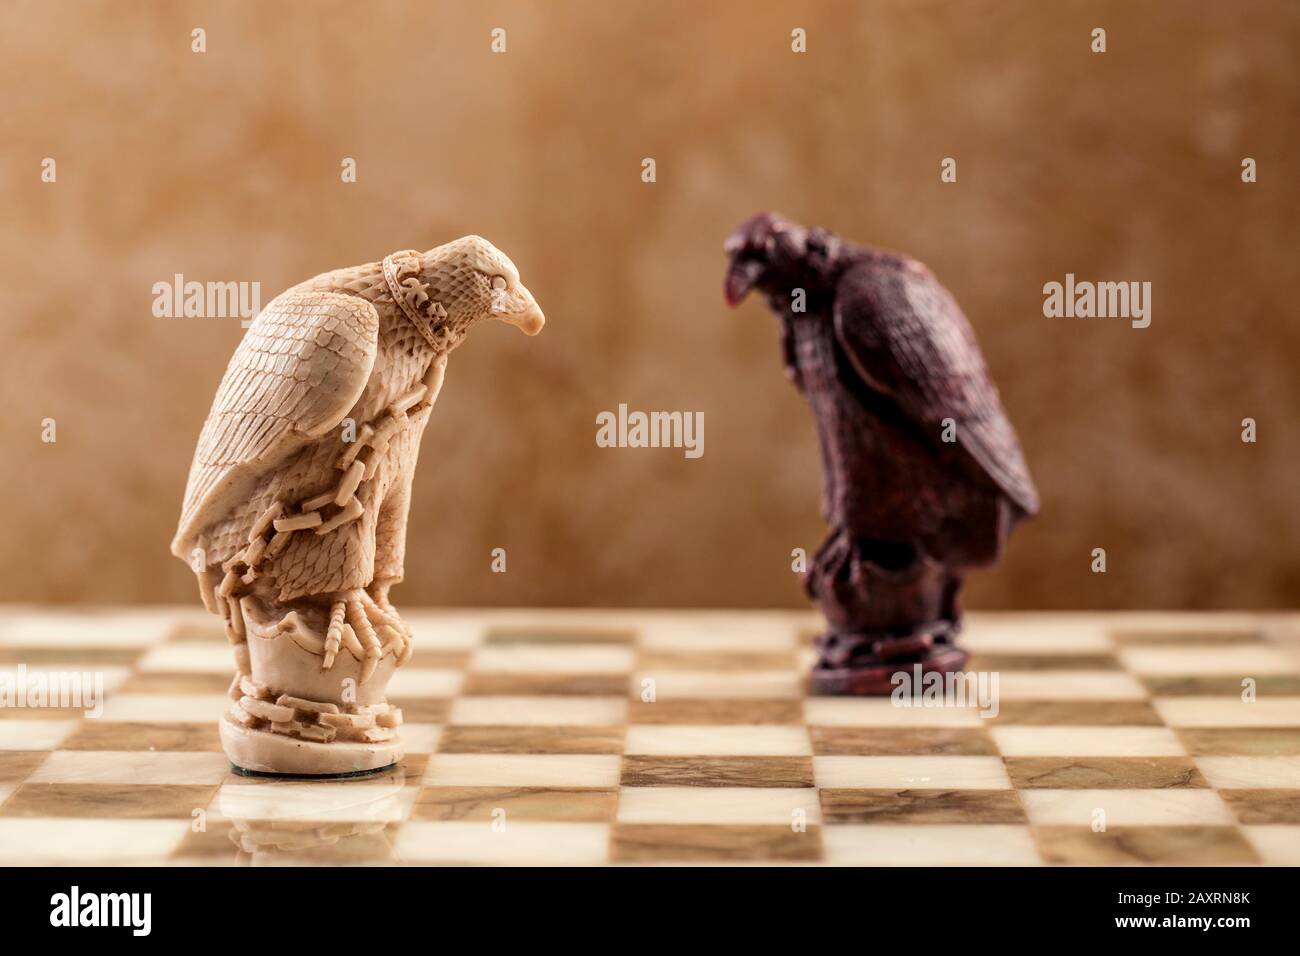 Сhess as an abstract concept. Two chess kings onon marble chess board. Stock Photo